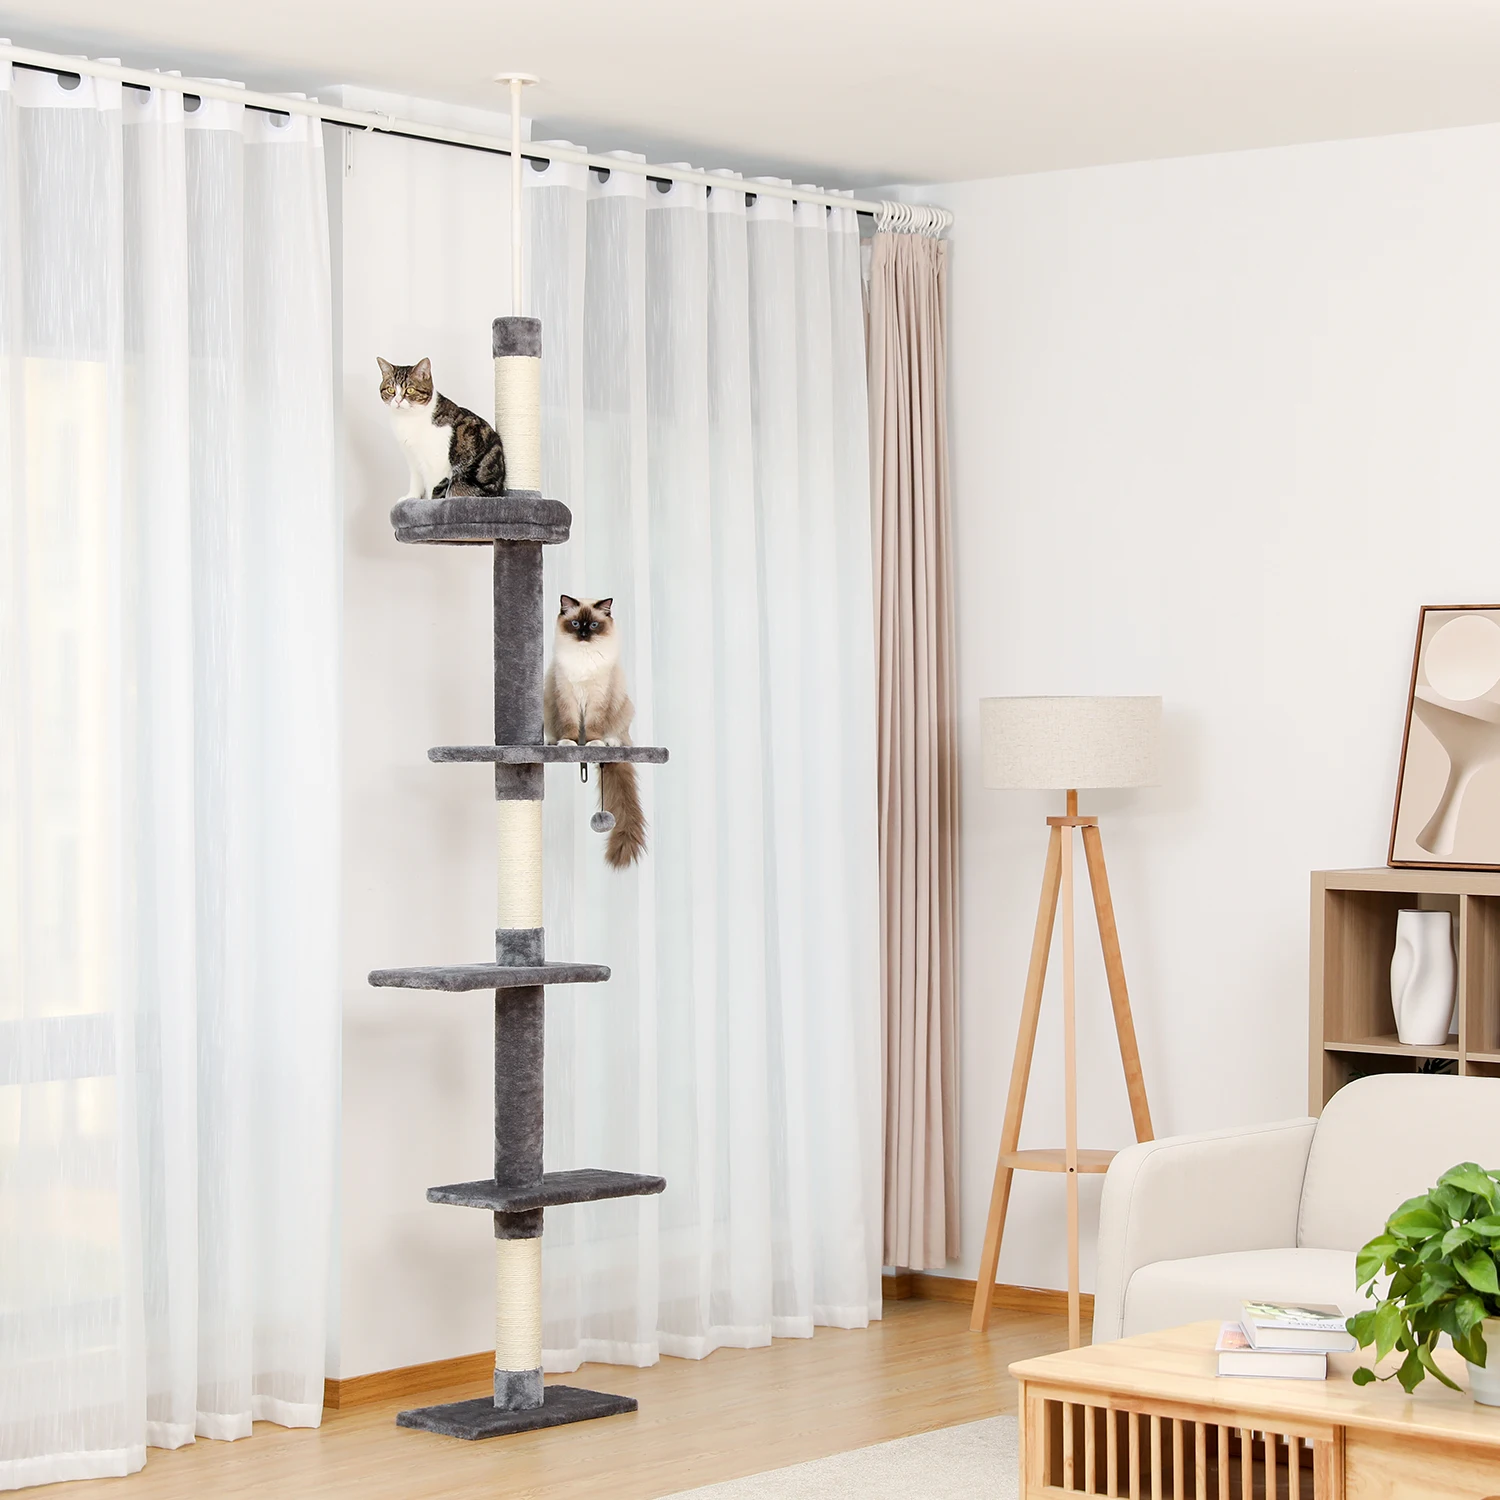 Adjustable 228-274cm Height Floor-to-Ceiling Vertical Cat Tree Stable Tall Cat Climbing Tree Cat Kittens Cat Toy 2